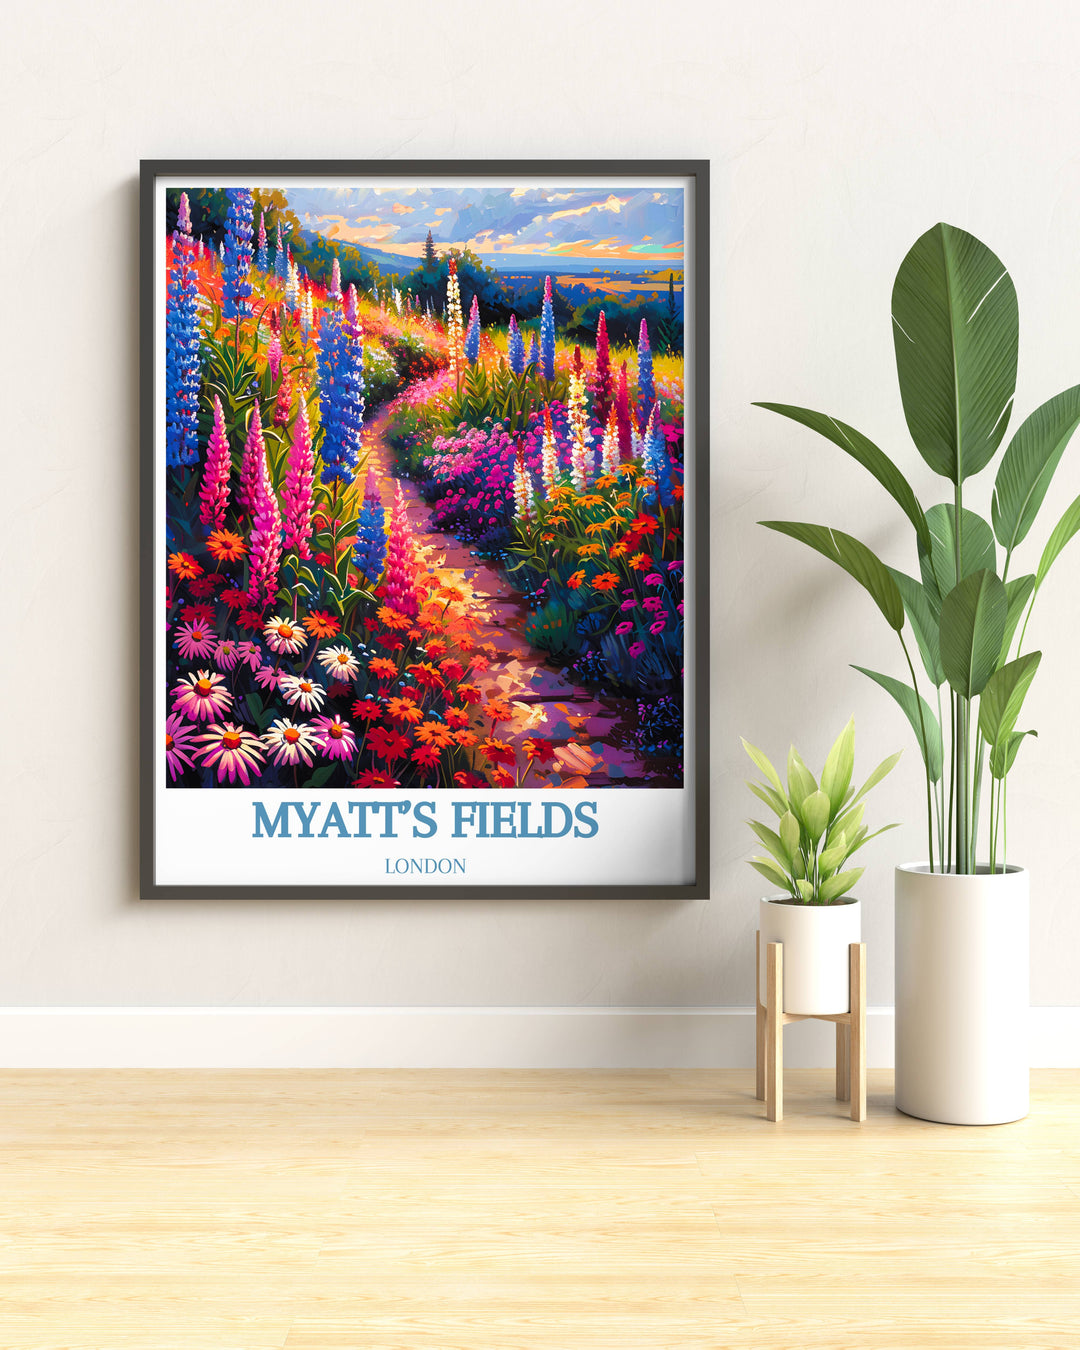 Vintage poster of Myatts Field, capturing the historical elegance of one of Londons cherished green spaces.